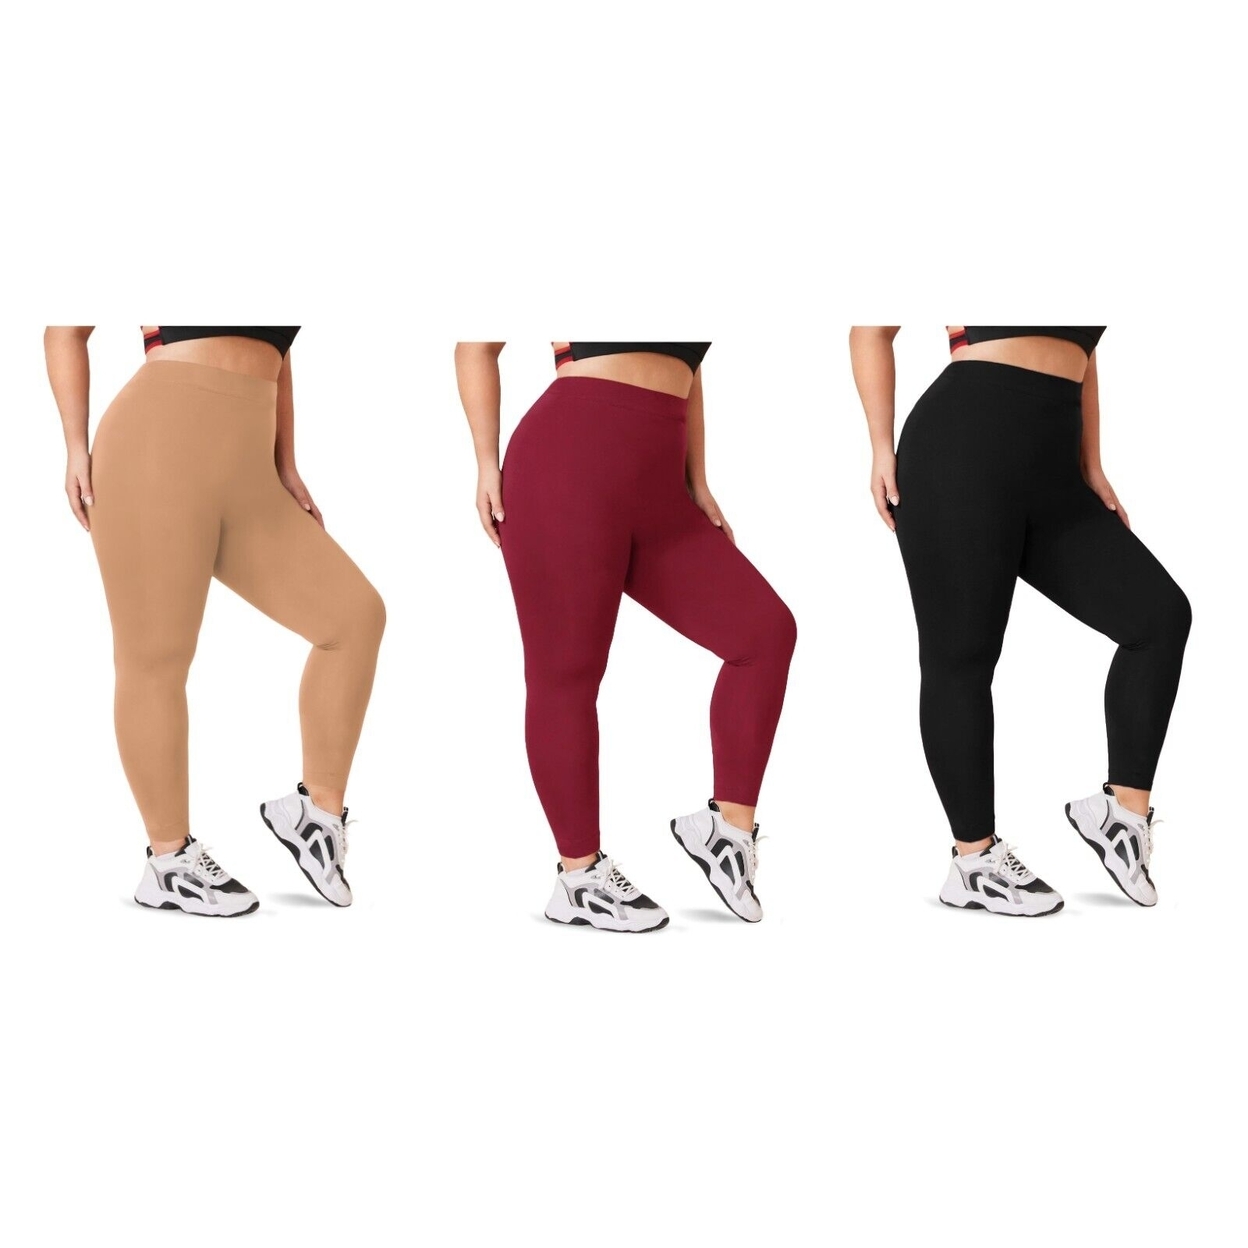 2-Pack: Women's Casual Ultra-Soft Smooth High Waisted Athletic Active Yoga Leggings Plus Size Available - Beige & Red, 4x